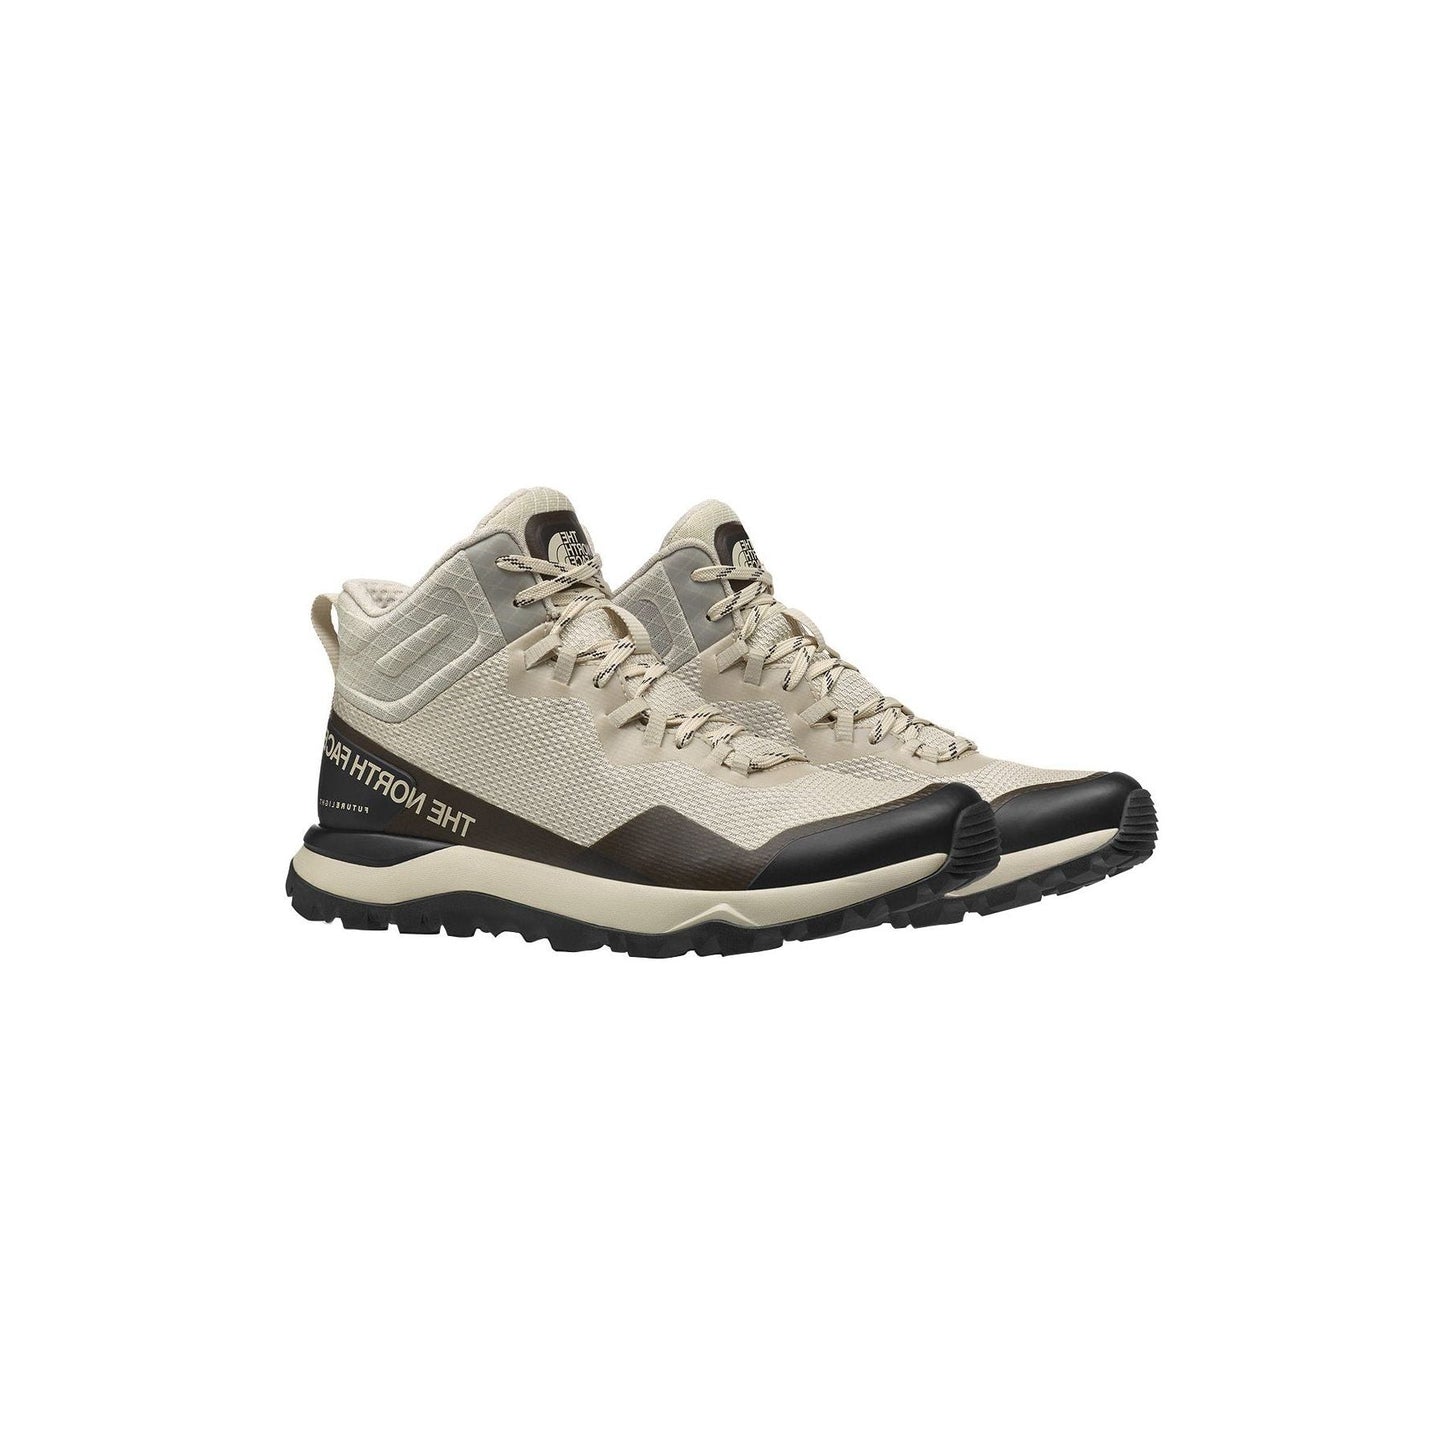 The North Face W Hiking Boots Women's Activist Mid Futurelight, Vintage White / Black